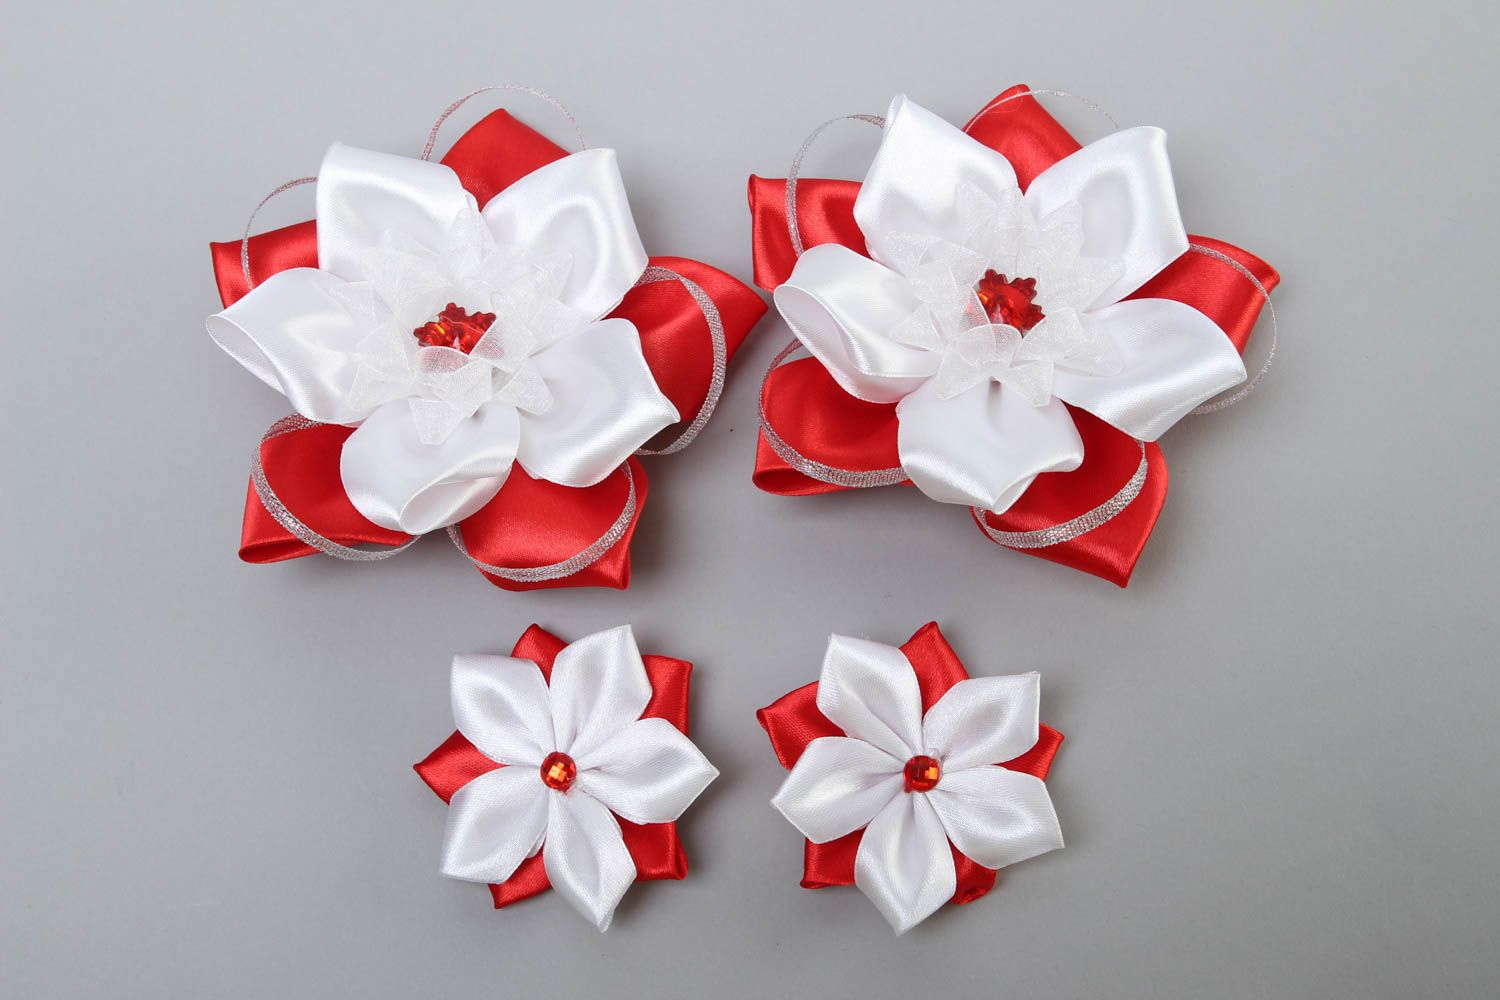 Flower hair clips designer hair accessory gift ideas unusual gift set of 4 items photo 2